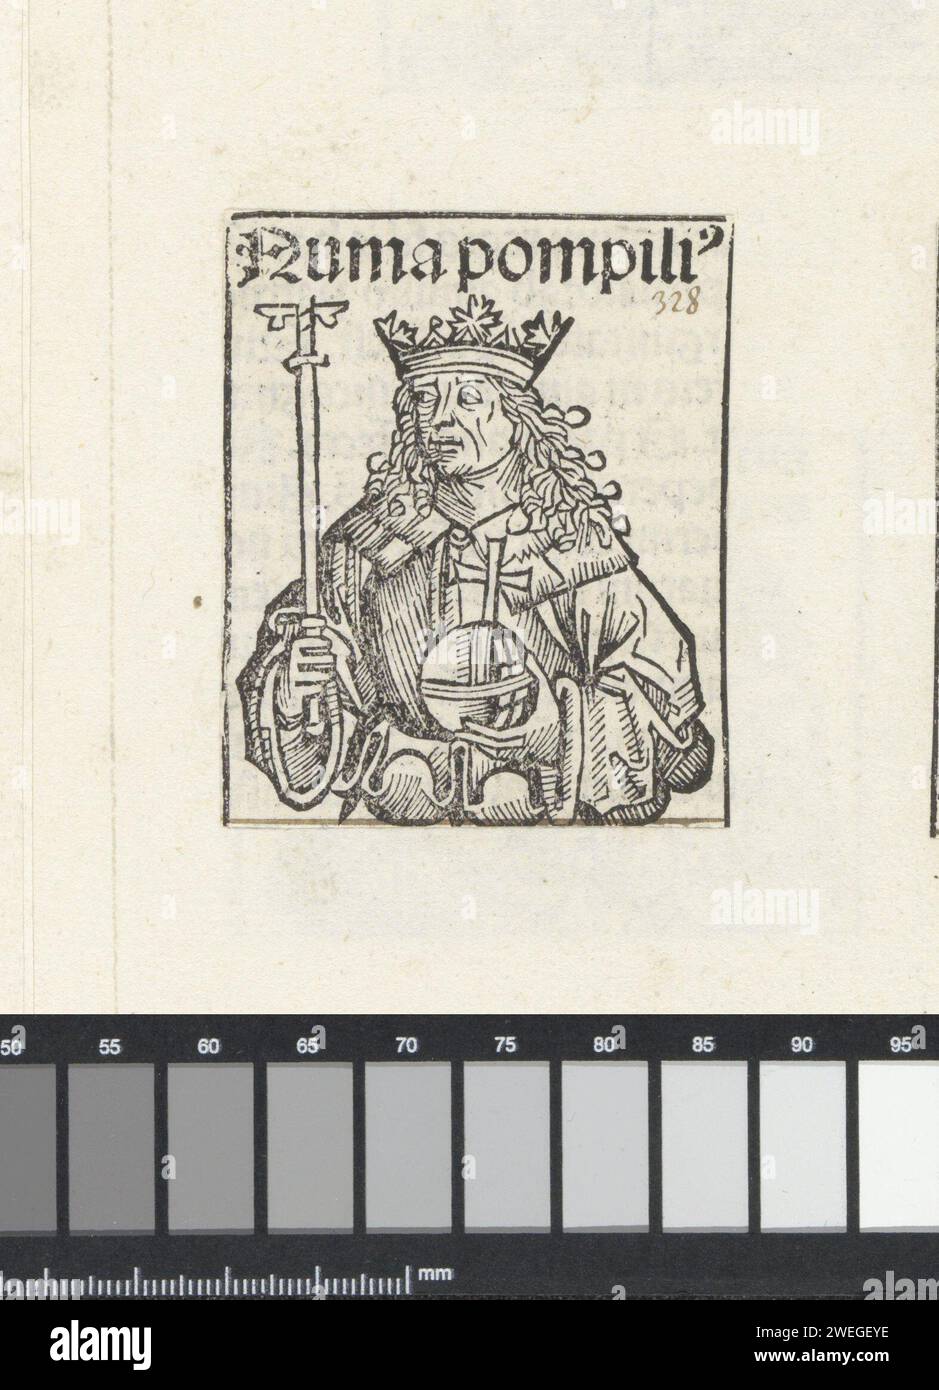 Deding there sulled Alagly, Mihipalels supe, 1493 print A flower chalice with a king, his head turned to the left. He has a scepter and government apple in his hands. The performance is part of the Survival Roman kings in the Liber Chronicarum. The text identifies the man as Numa Pompilius. The print is part of an album.  paper letterpress printing king. (story of) Numa Pompilius Stock Photo